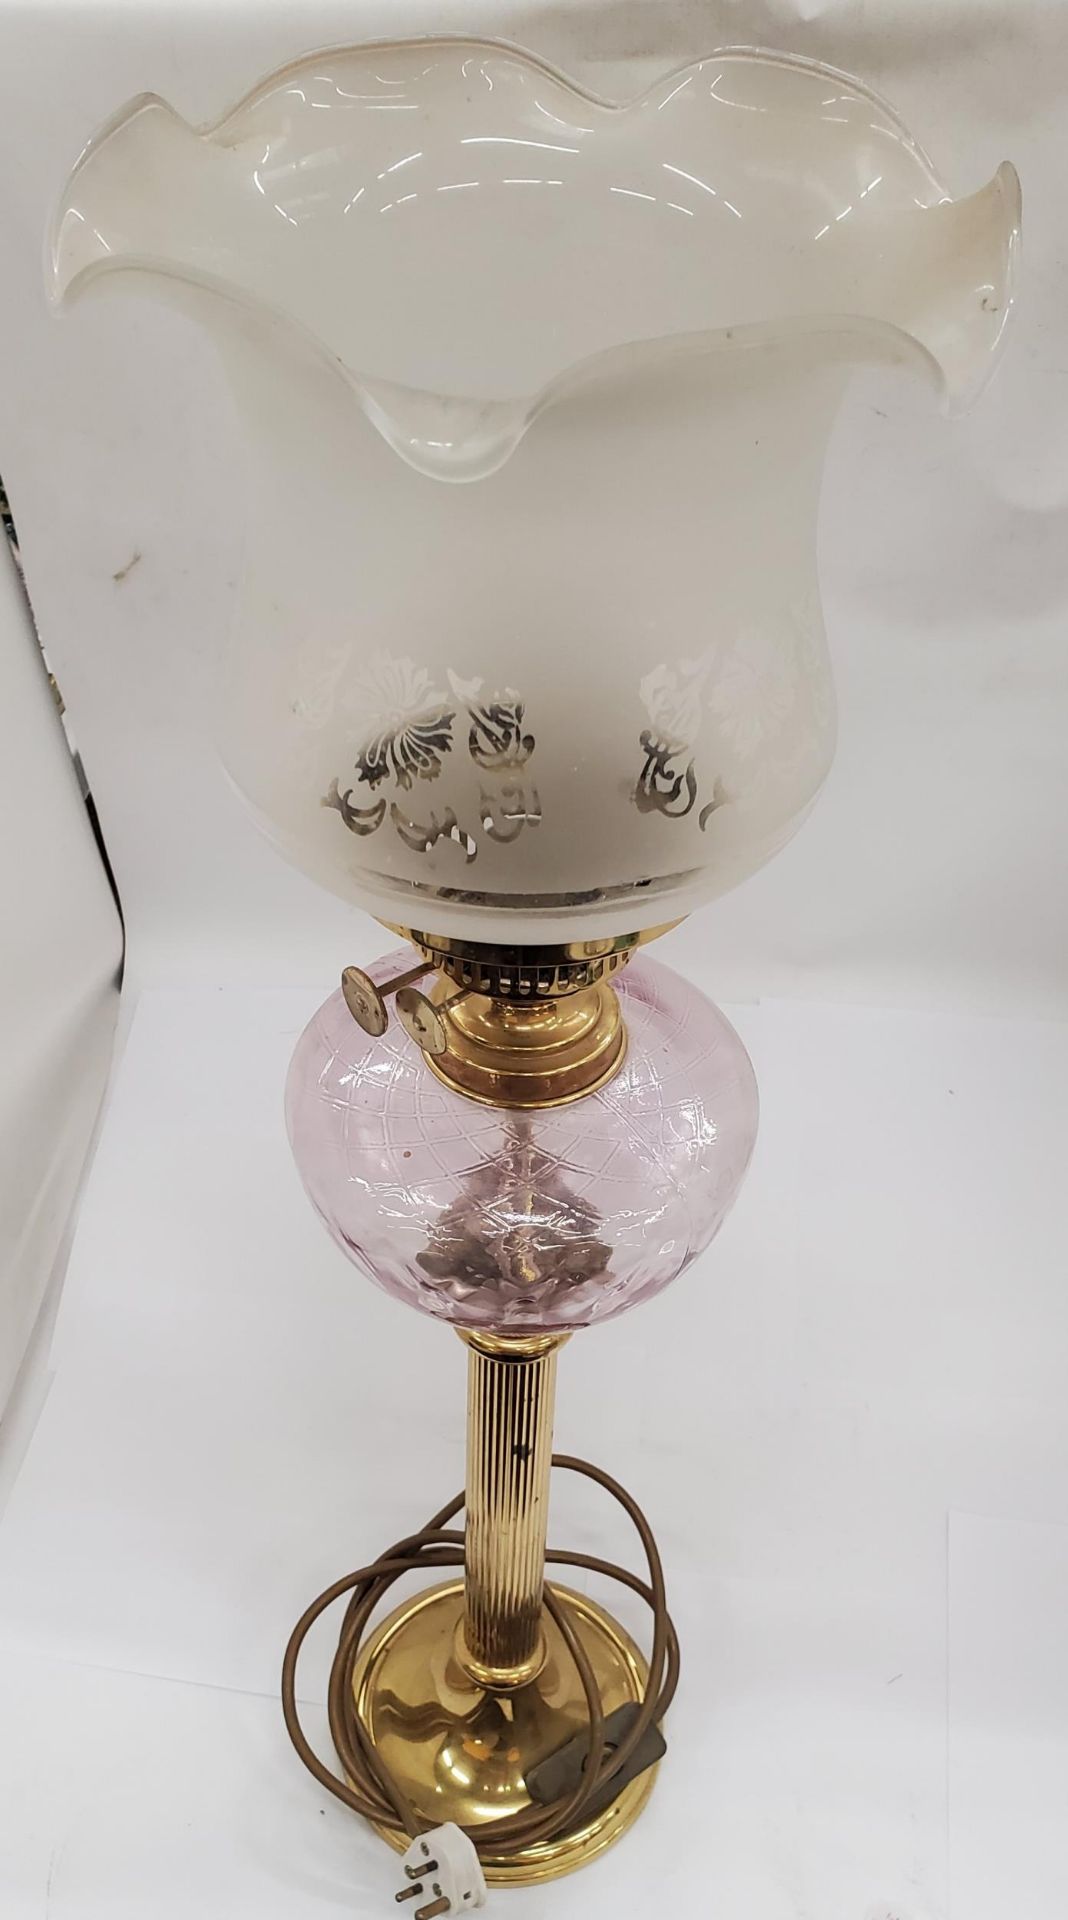 A LARGE TABLE LAMP IN THE STYLE OF A VINTAGE OIL LAMP, WITH BRASS STEM, FROSTED GLASS SHADE AND PINK